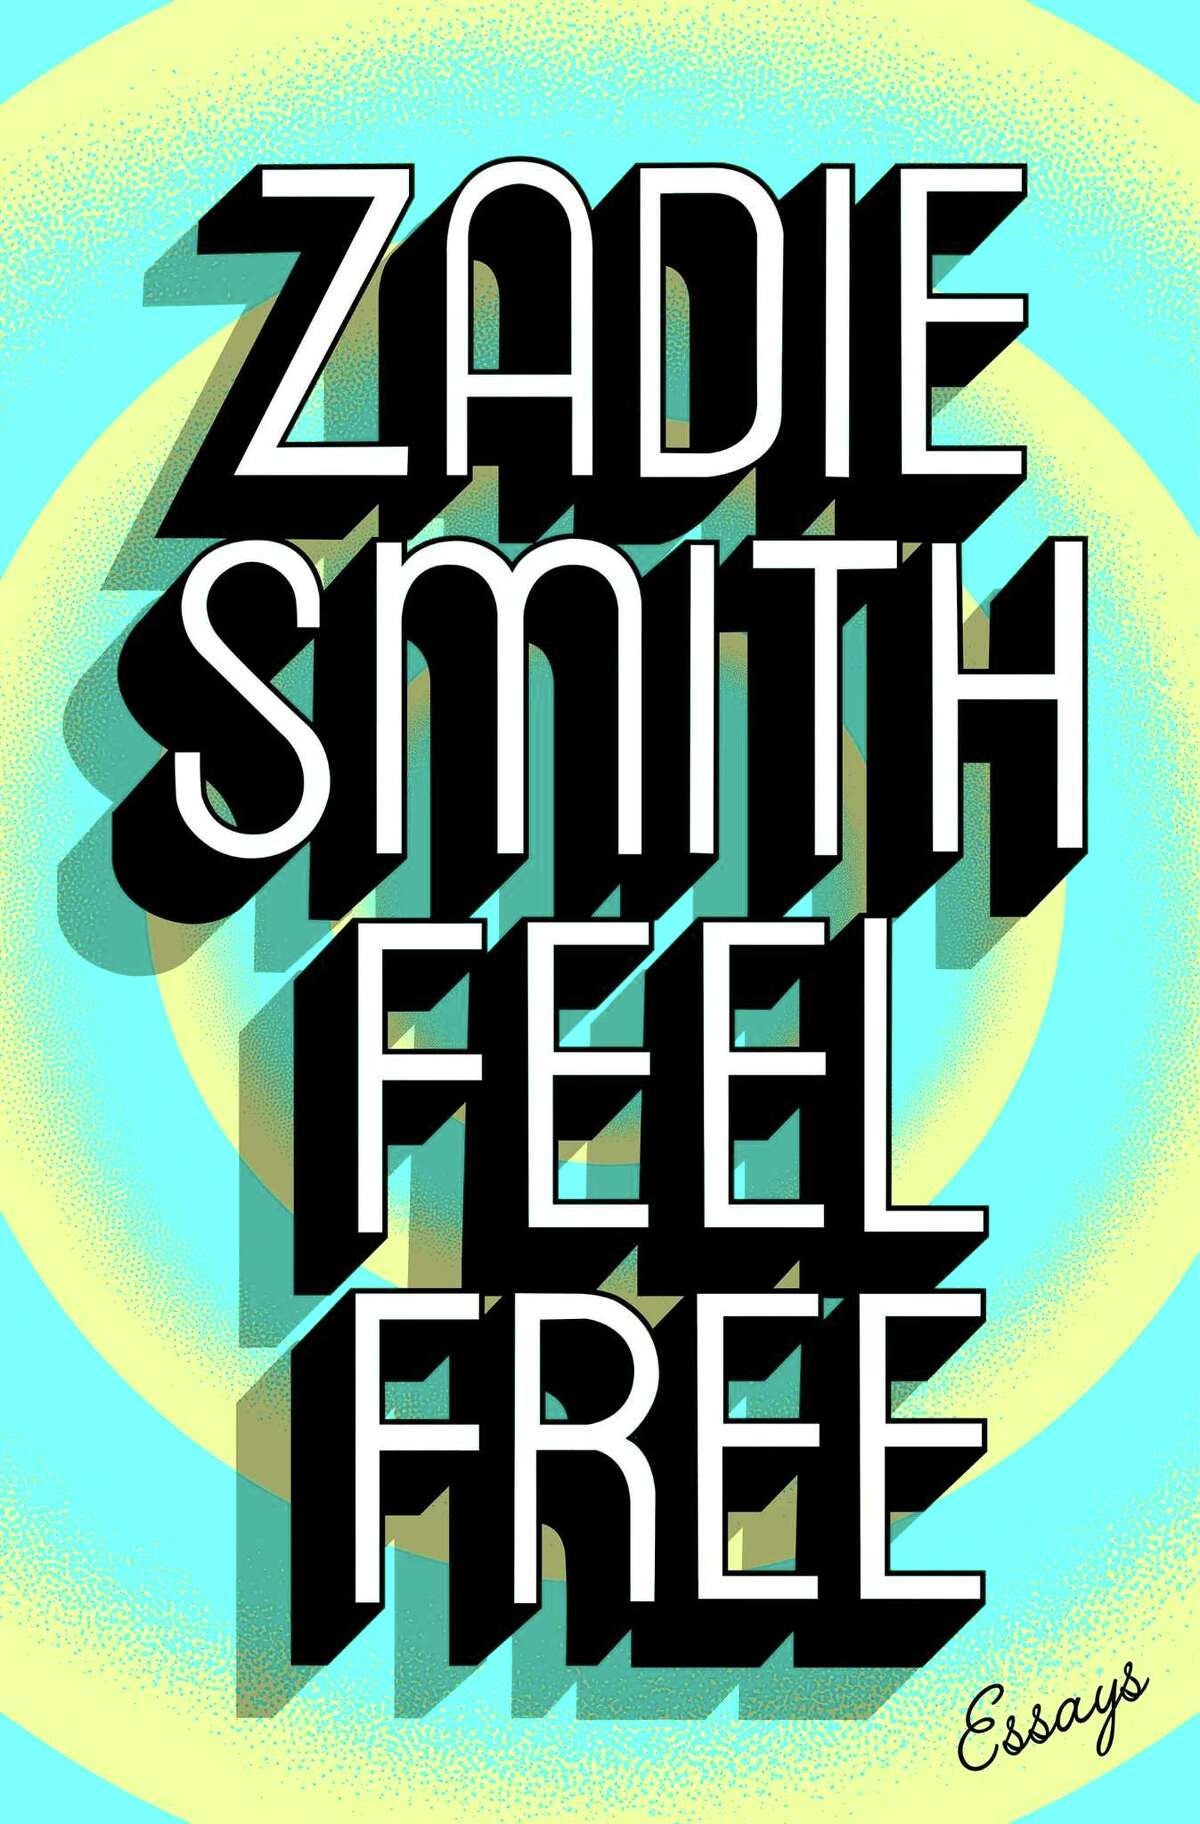 This book cover image released by Penguin Press shows "Feel Free," a collection of essays by Zadie Smith. (Penguin Press via AP)